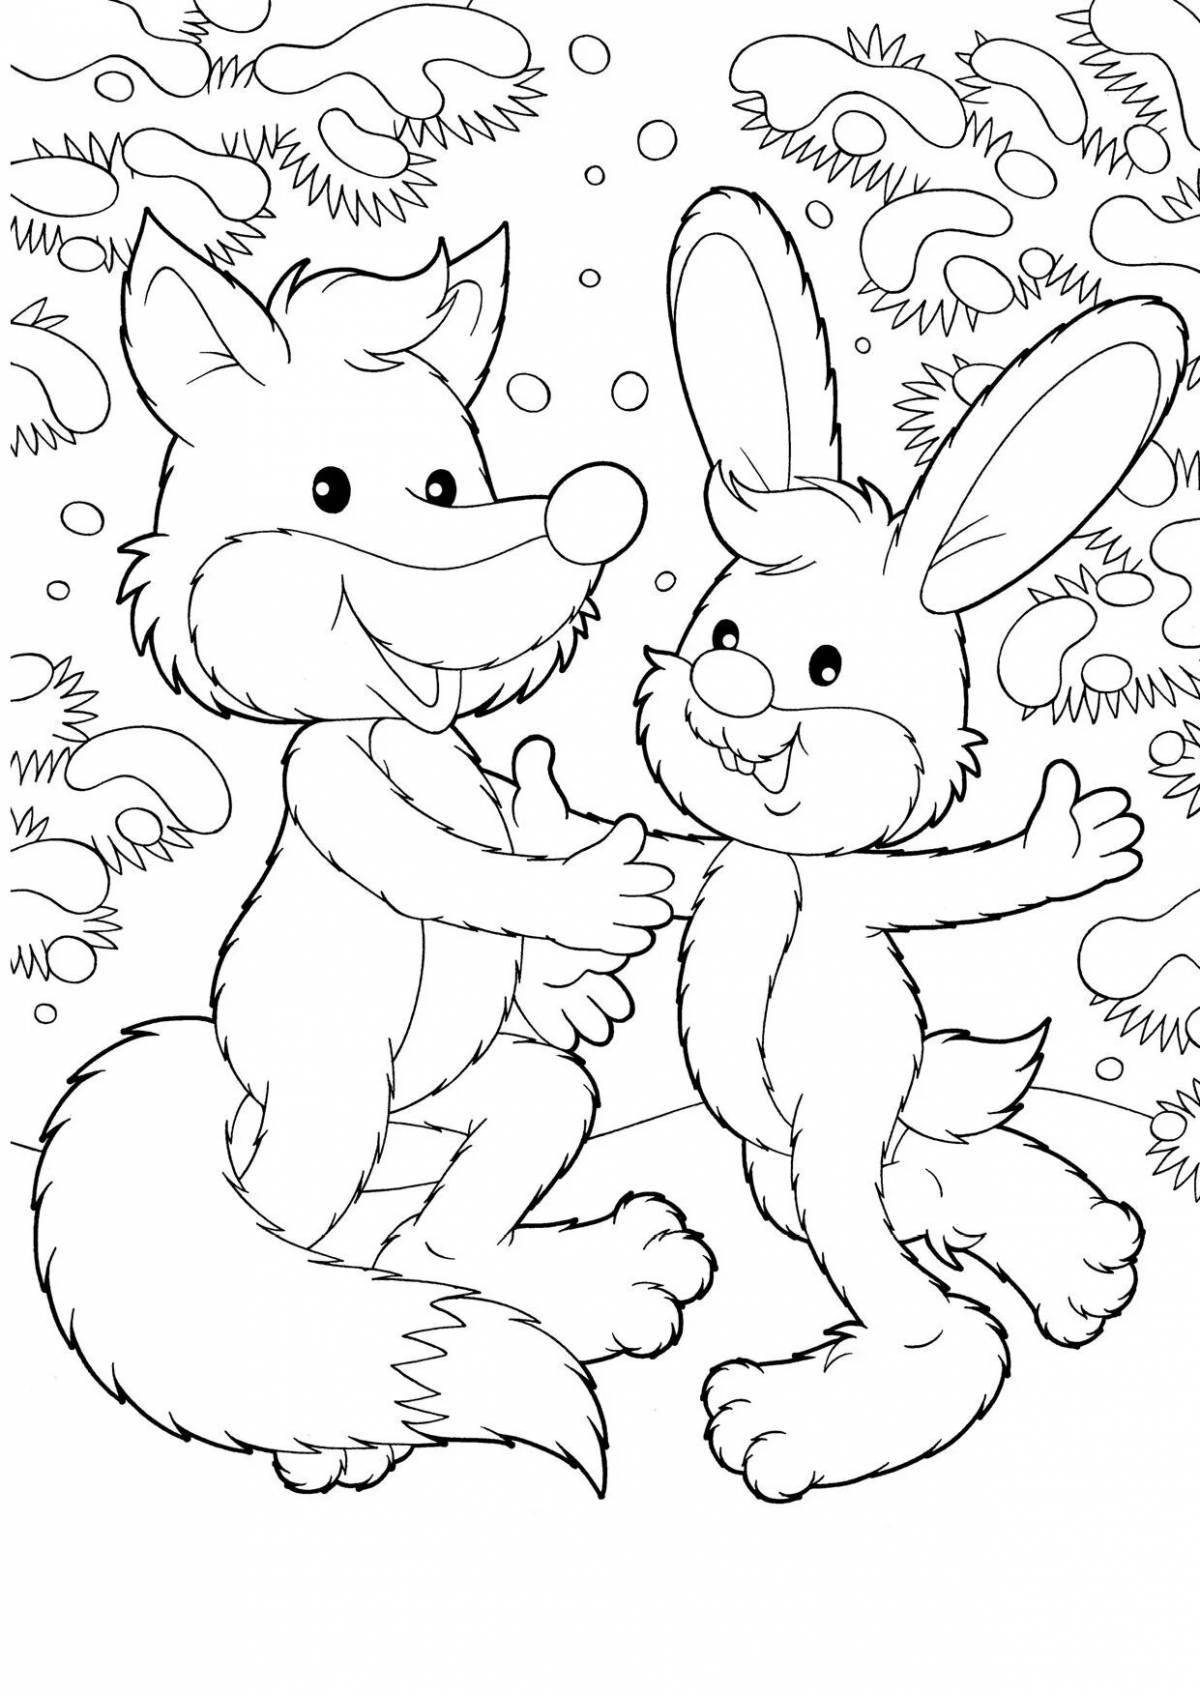 Charming fox and hare coloring book